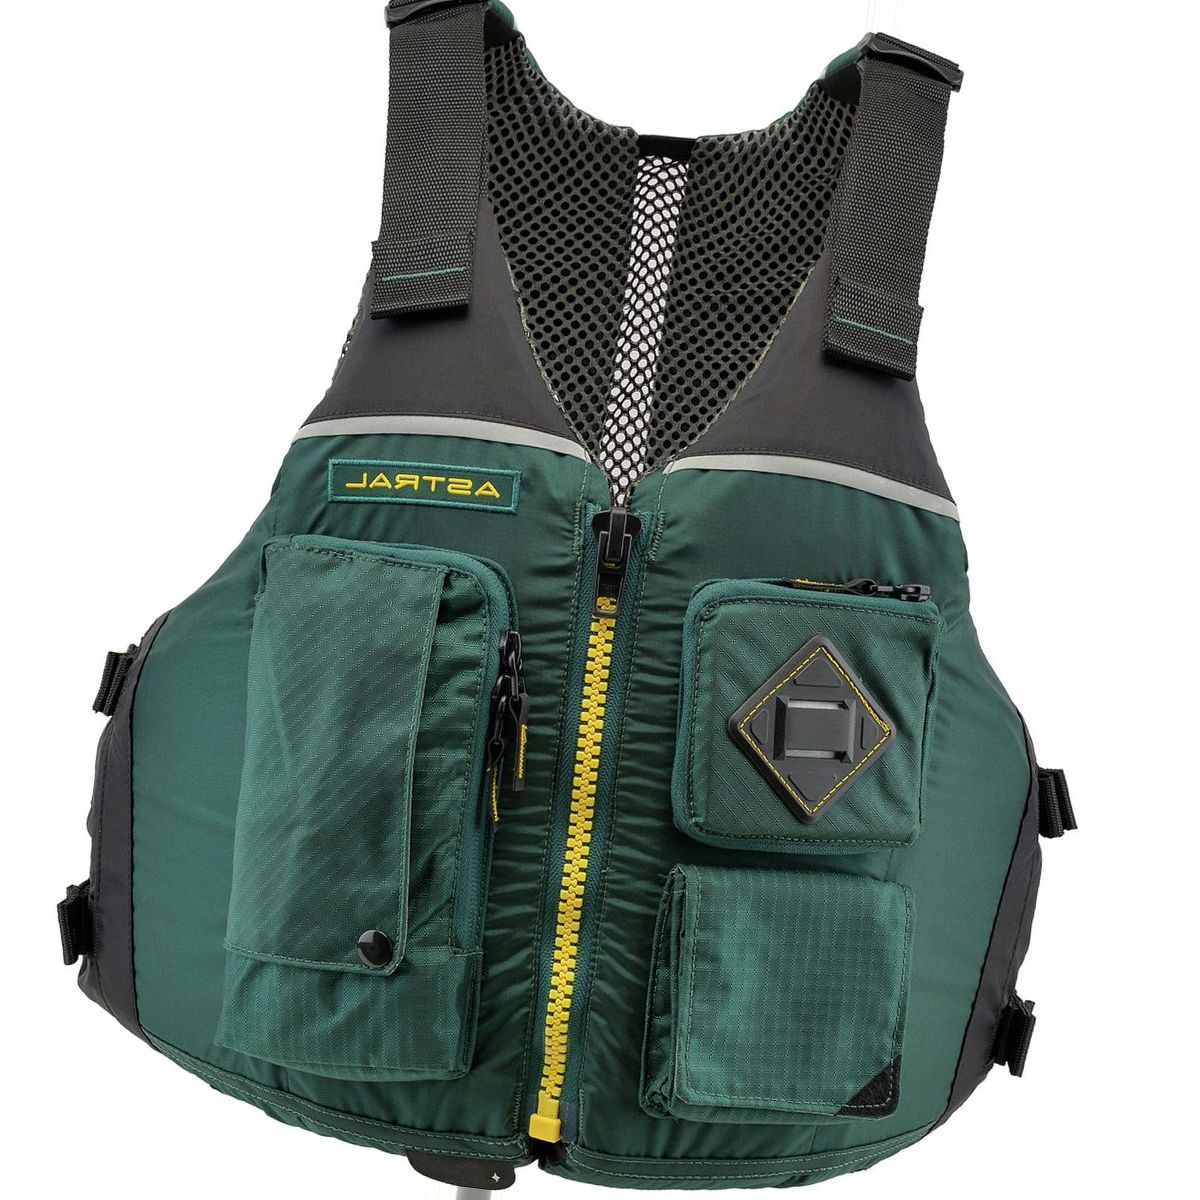 Astral Ronny Personal Flotation Device - Men's